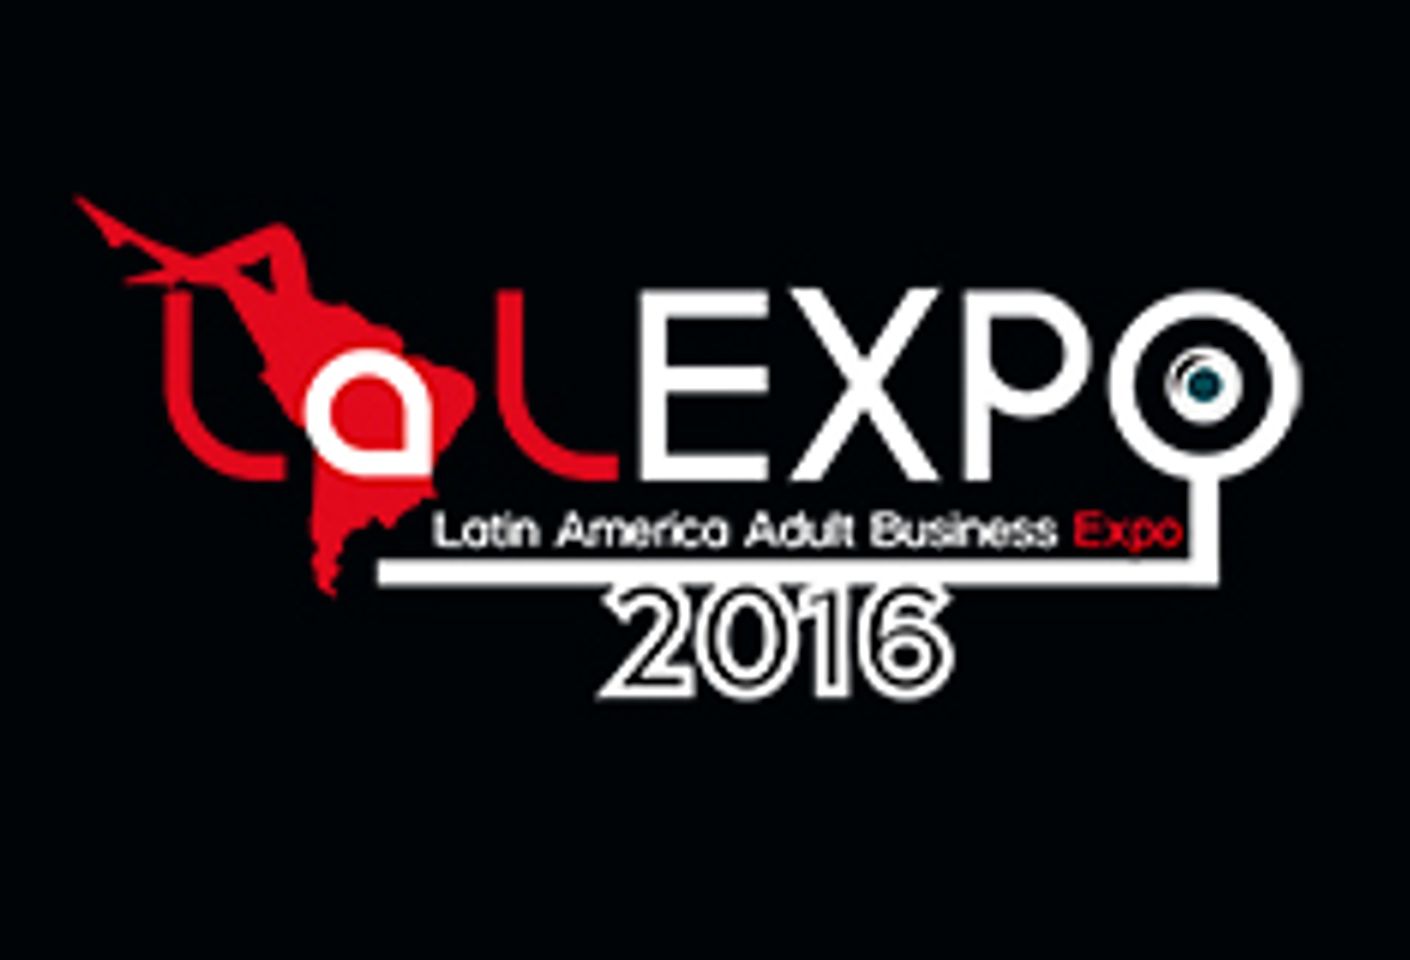 Speakers, Schedule Announced For LALExpo